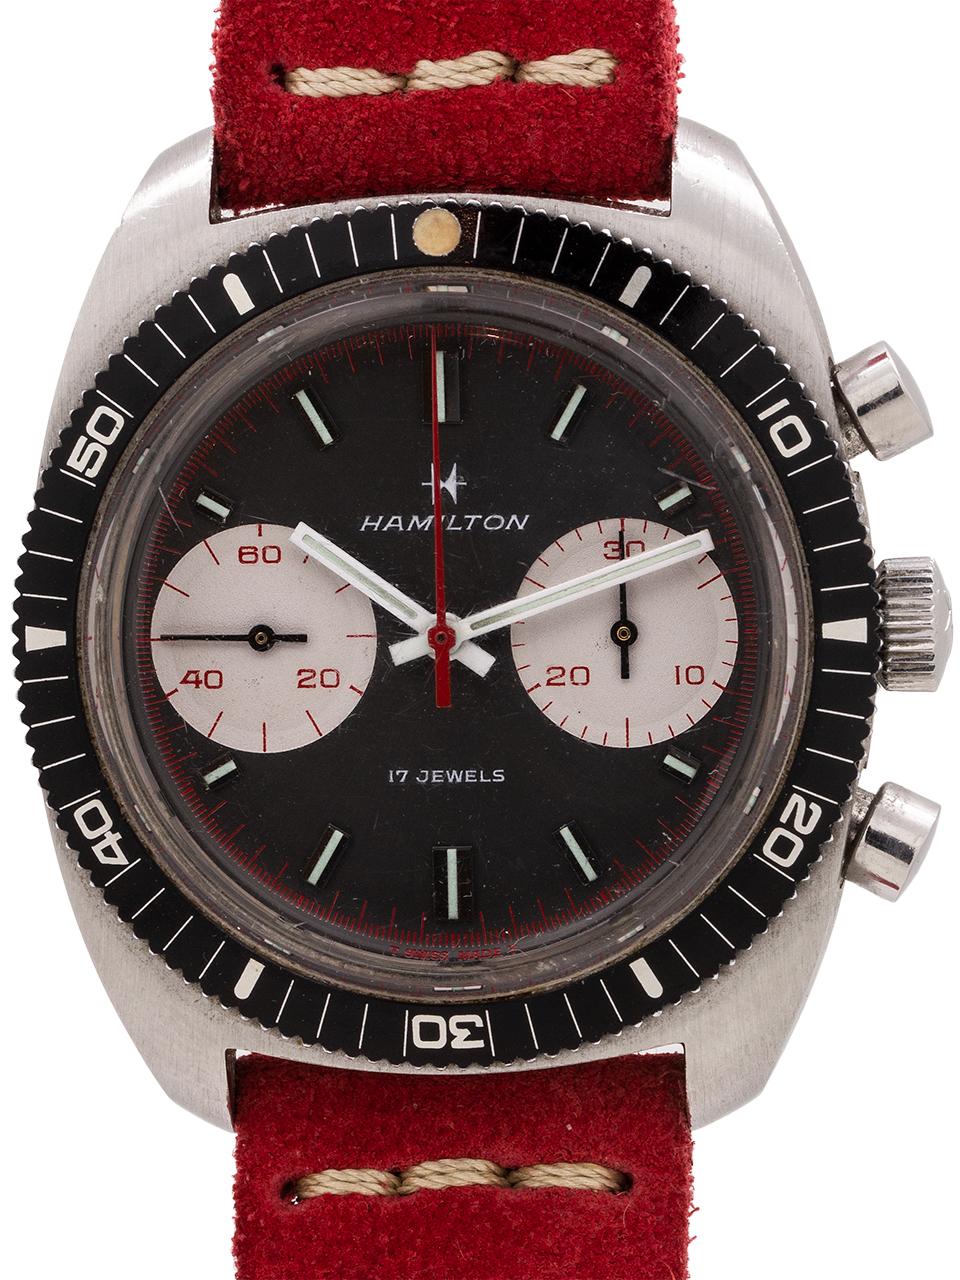 
Hamilton SS “big eye” chrono-Diver model 647, circa 1970’s. 39 x 40mm cushion shaped case heavy and thick design with round shoulders. With elapsed time bezel, round pushers and screw down caseback. With acrylic crystal and very pleasing original